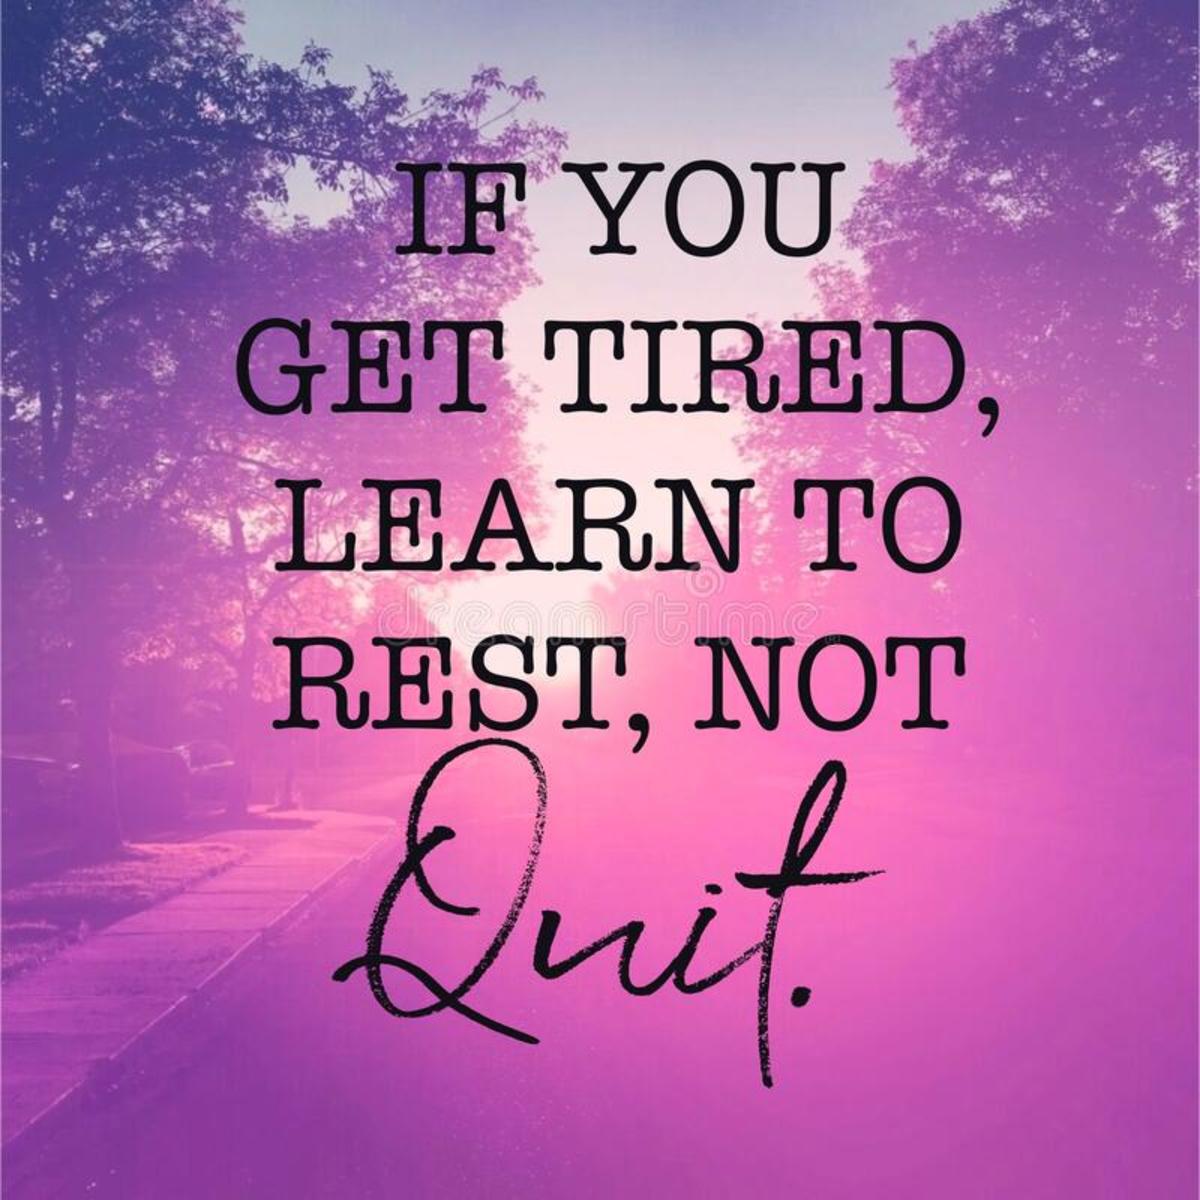 rest-is-important